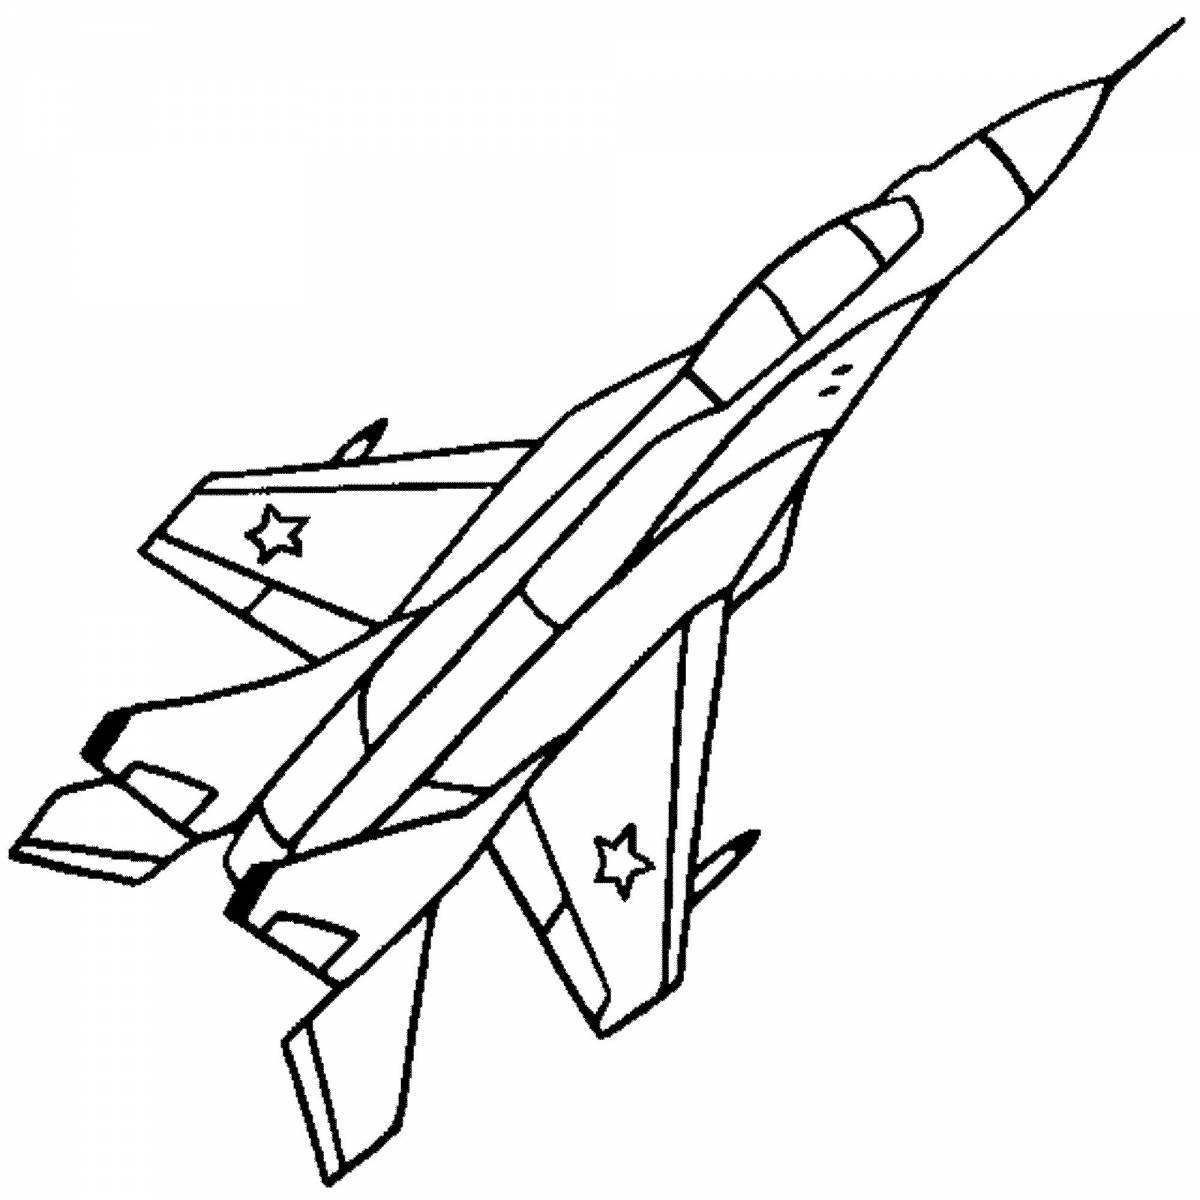 Coloring page elegant military aircraft